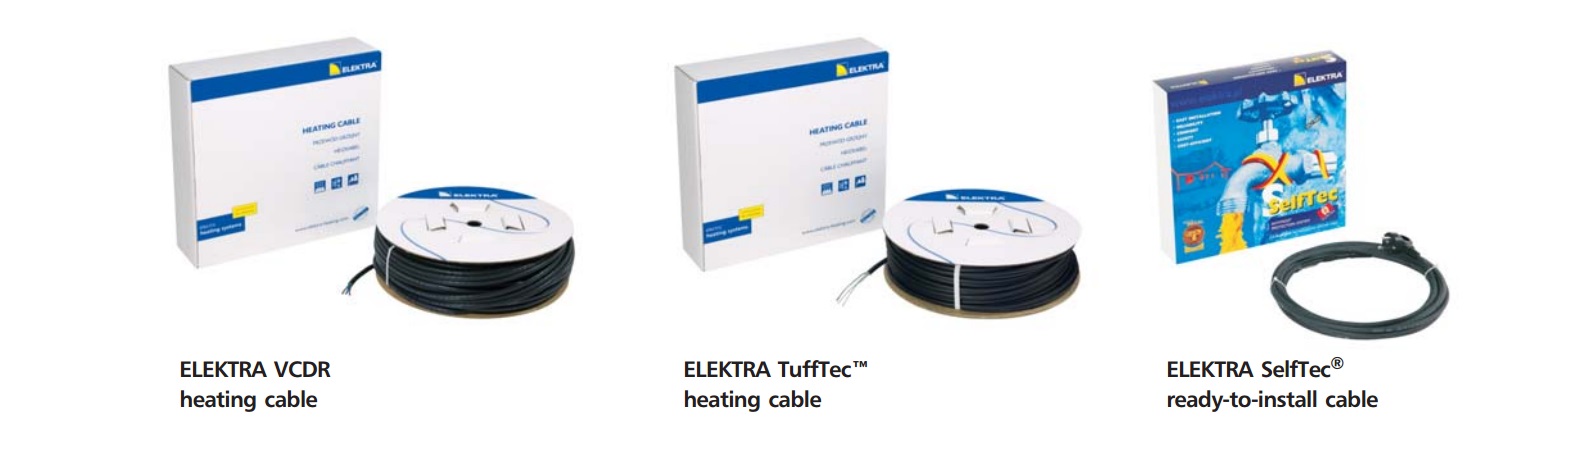  Heating cables frost protection cable accessories ELEKTRA 128